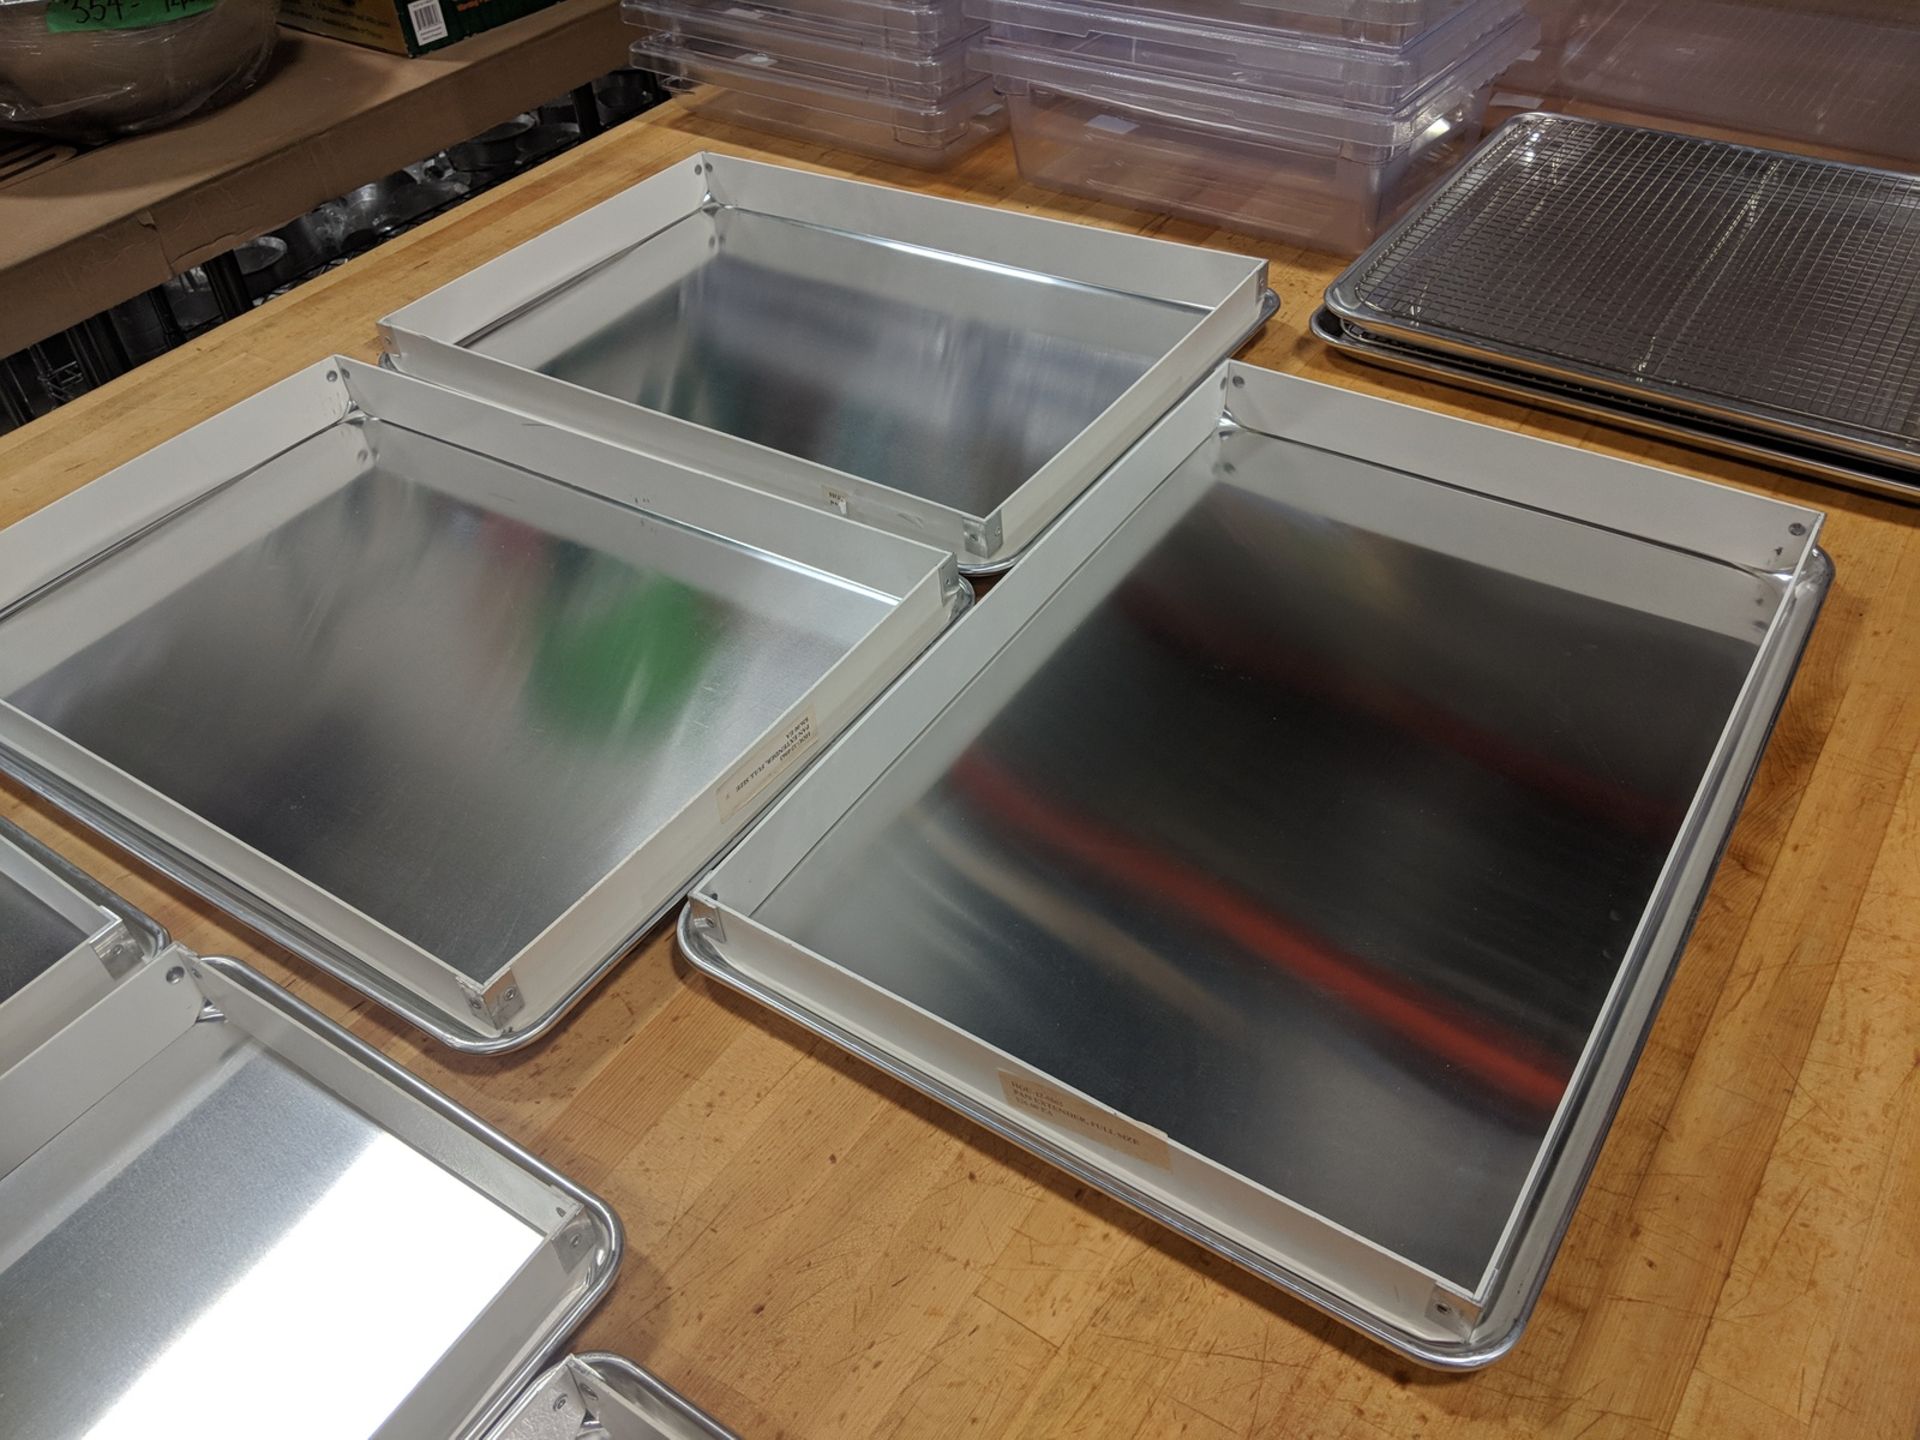 18" x 26" Bun Pans with Sheet Extenders - Lot of 3 (6 Pieces)